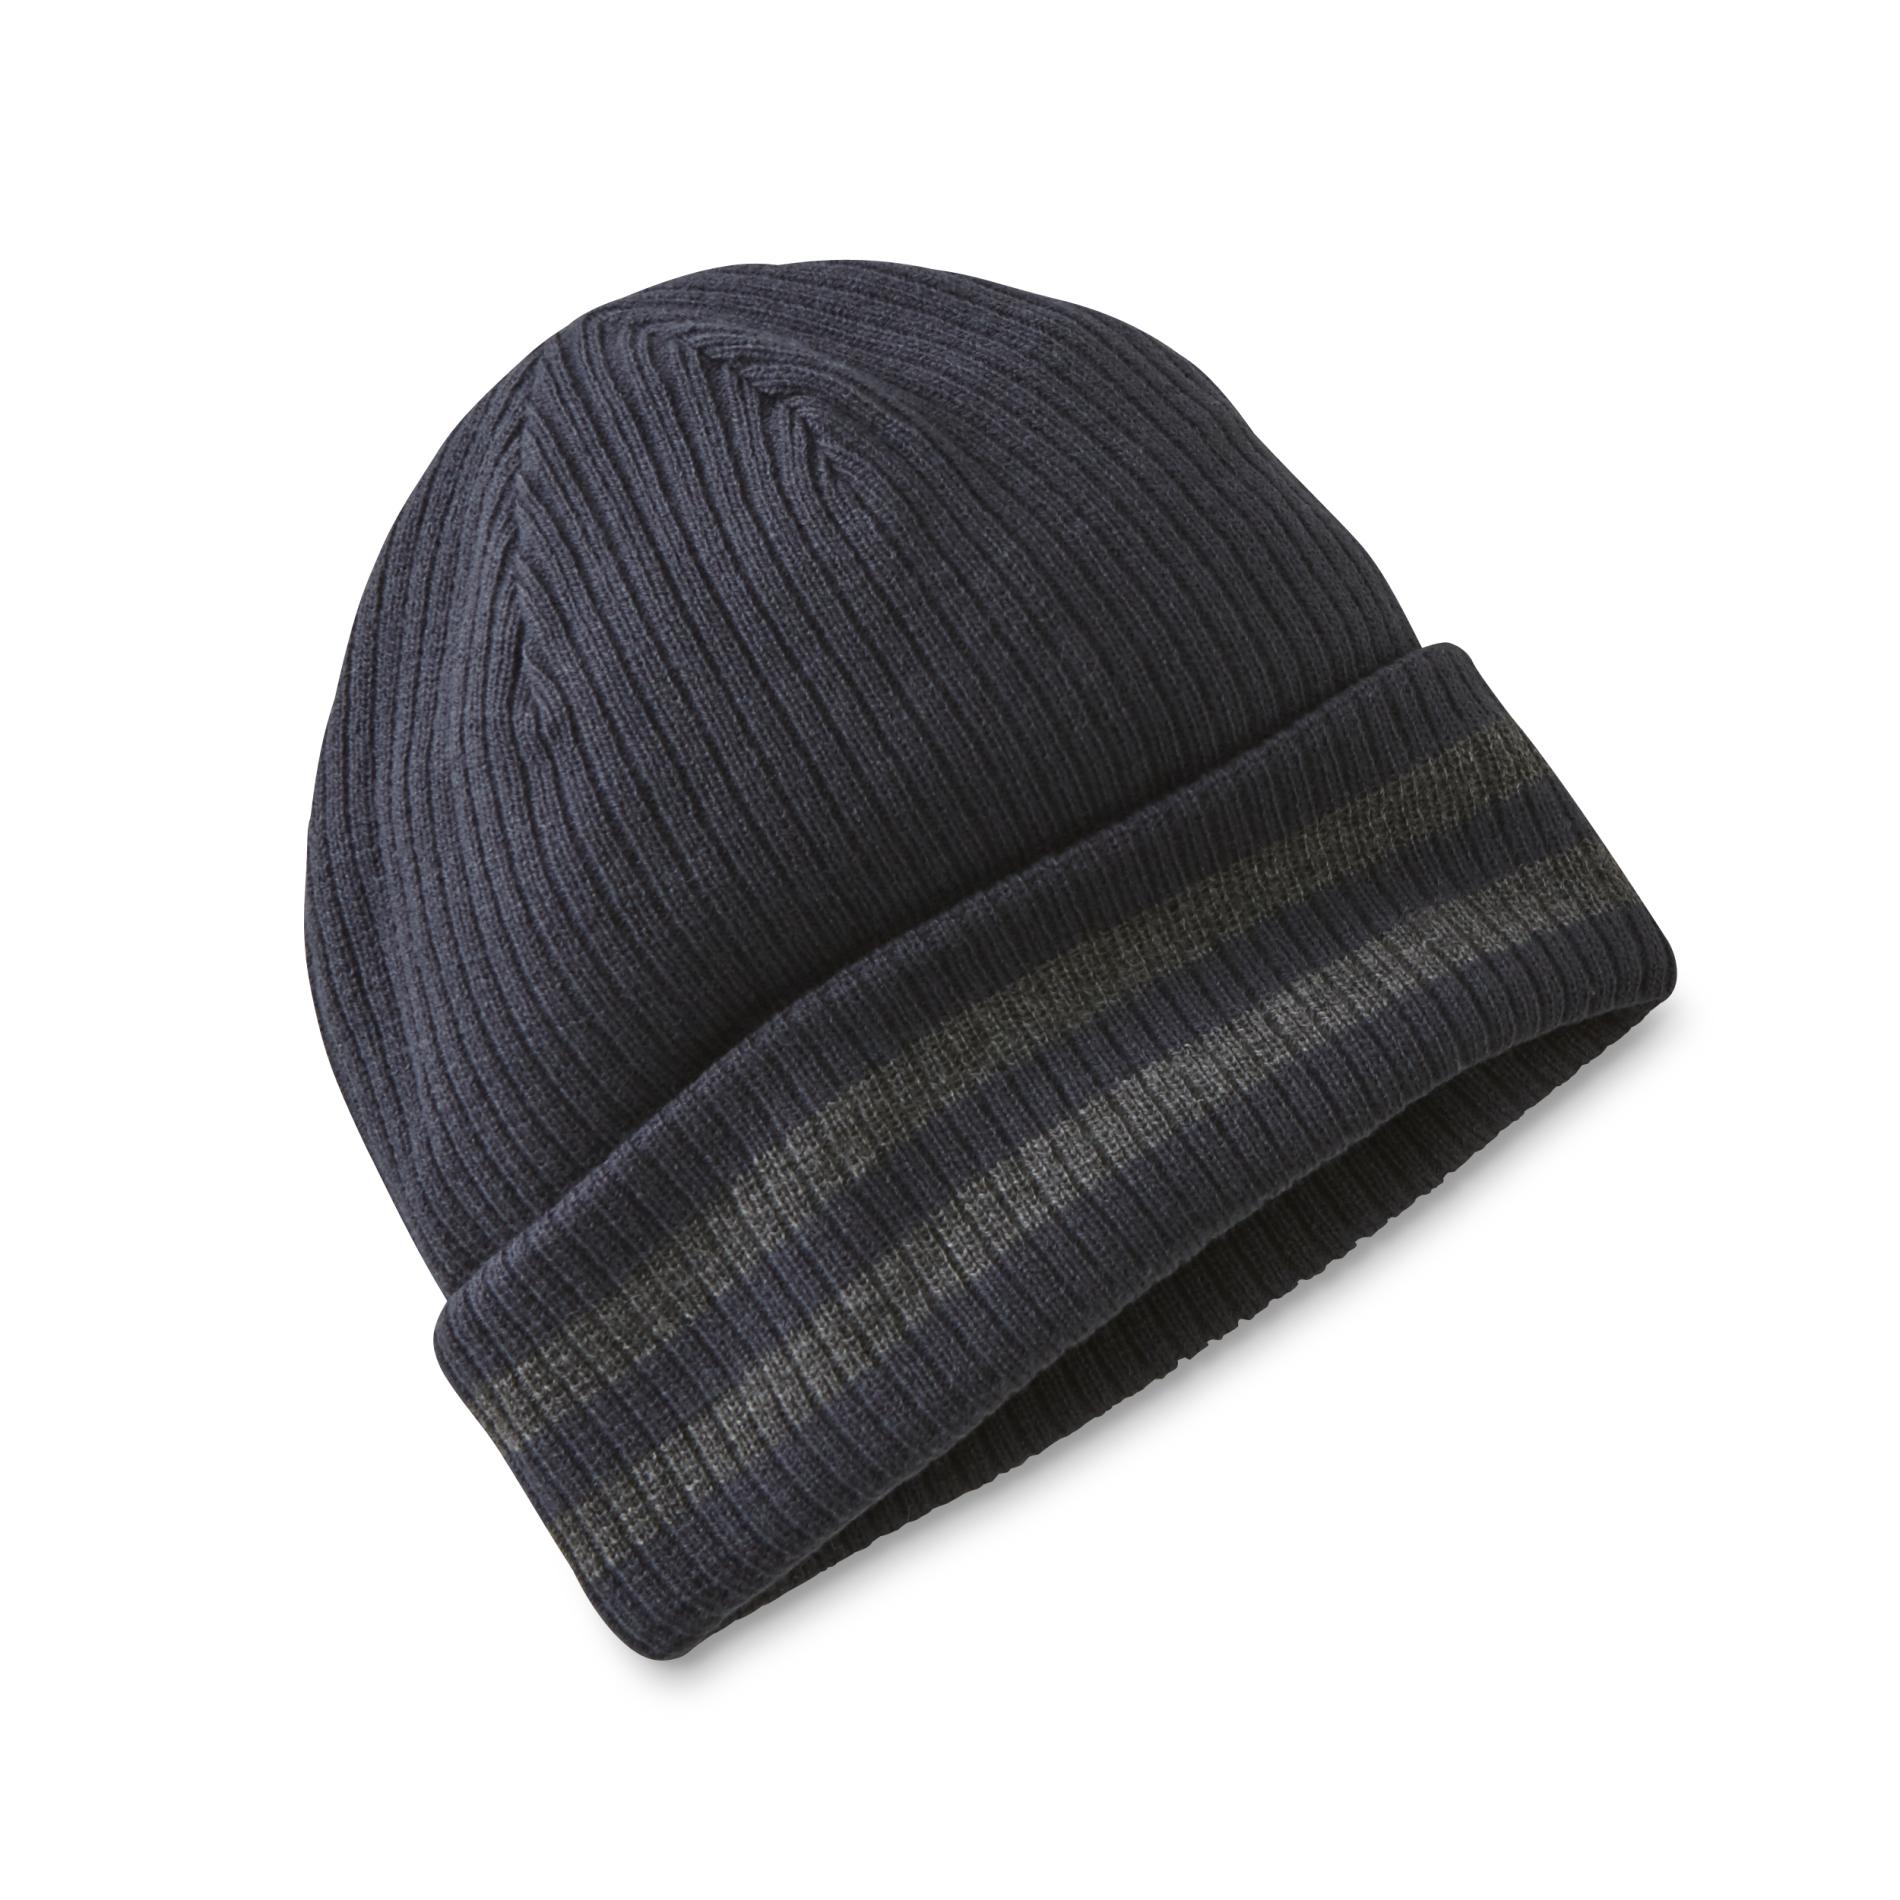 Simply Styled Men's Beanie Hat - Striped